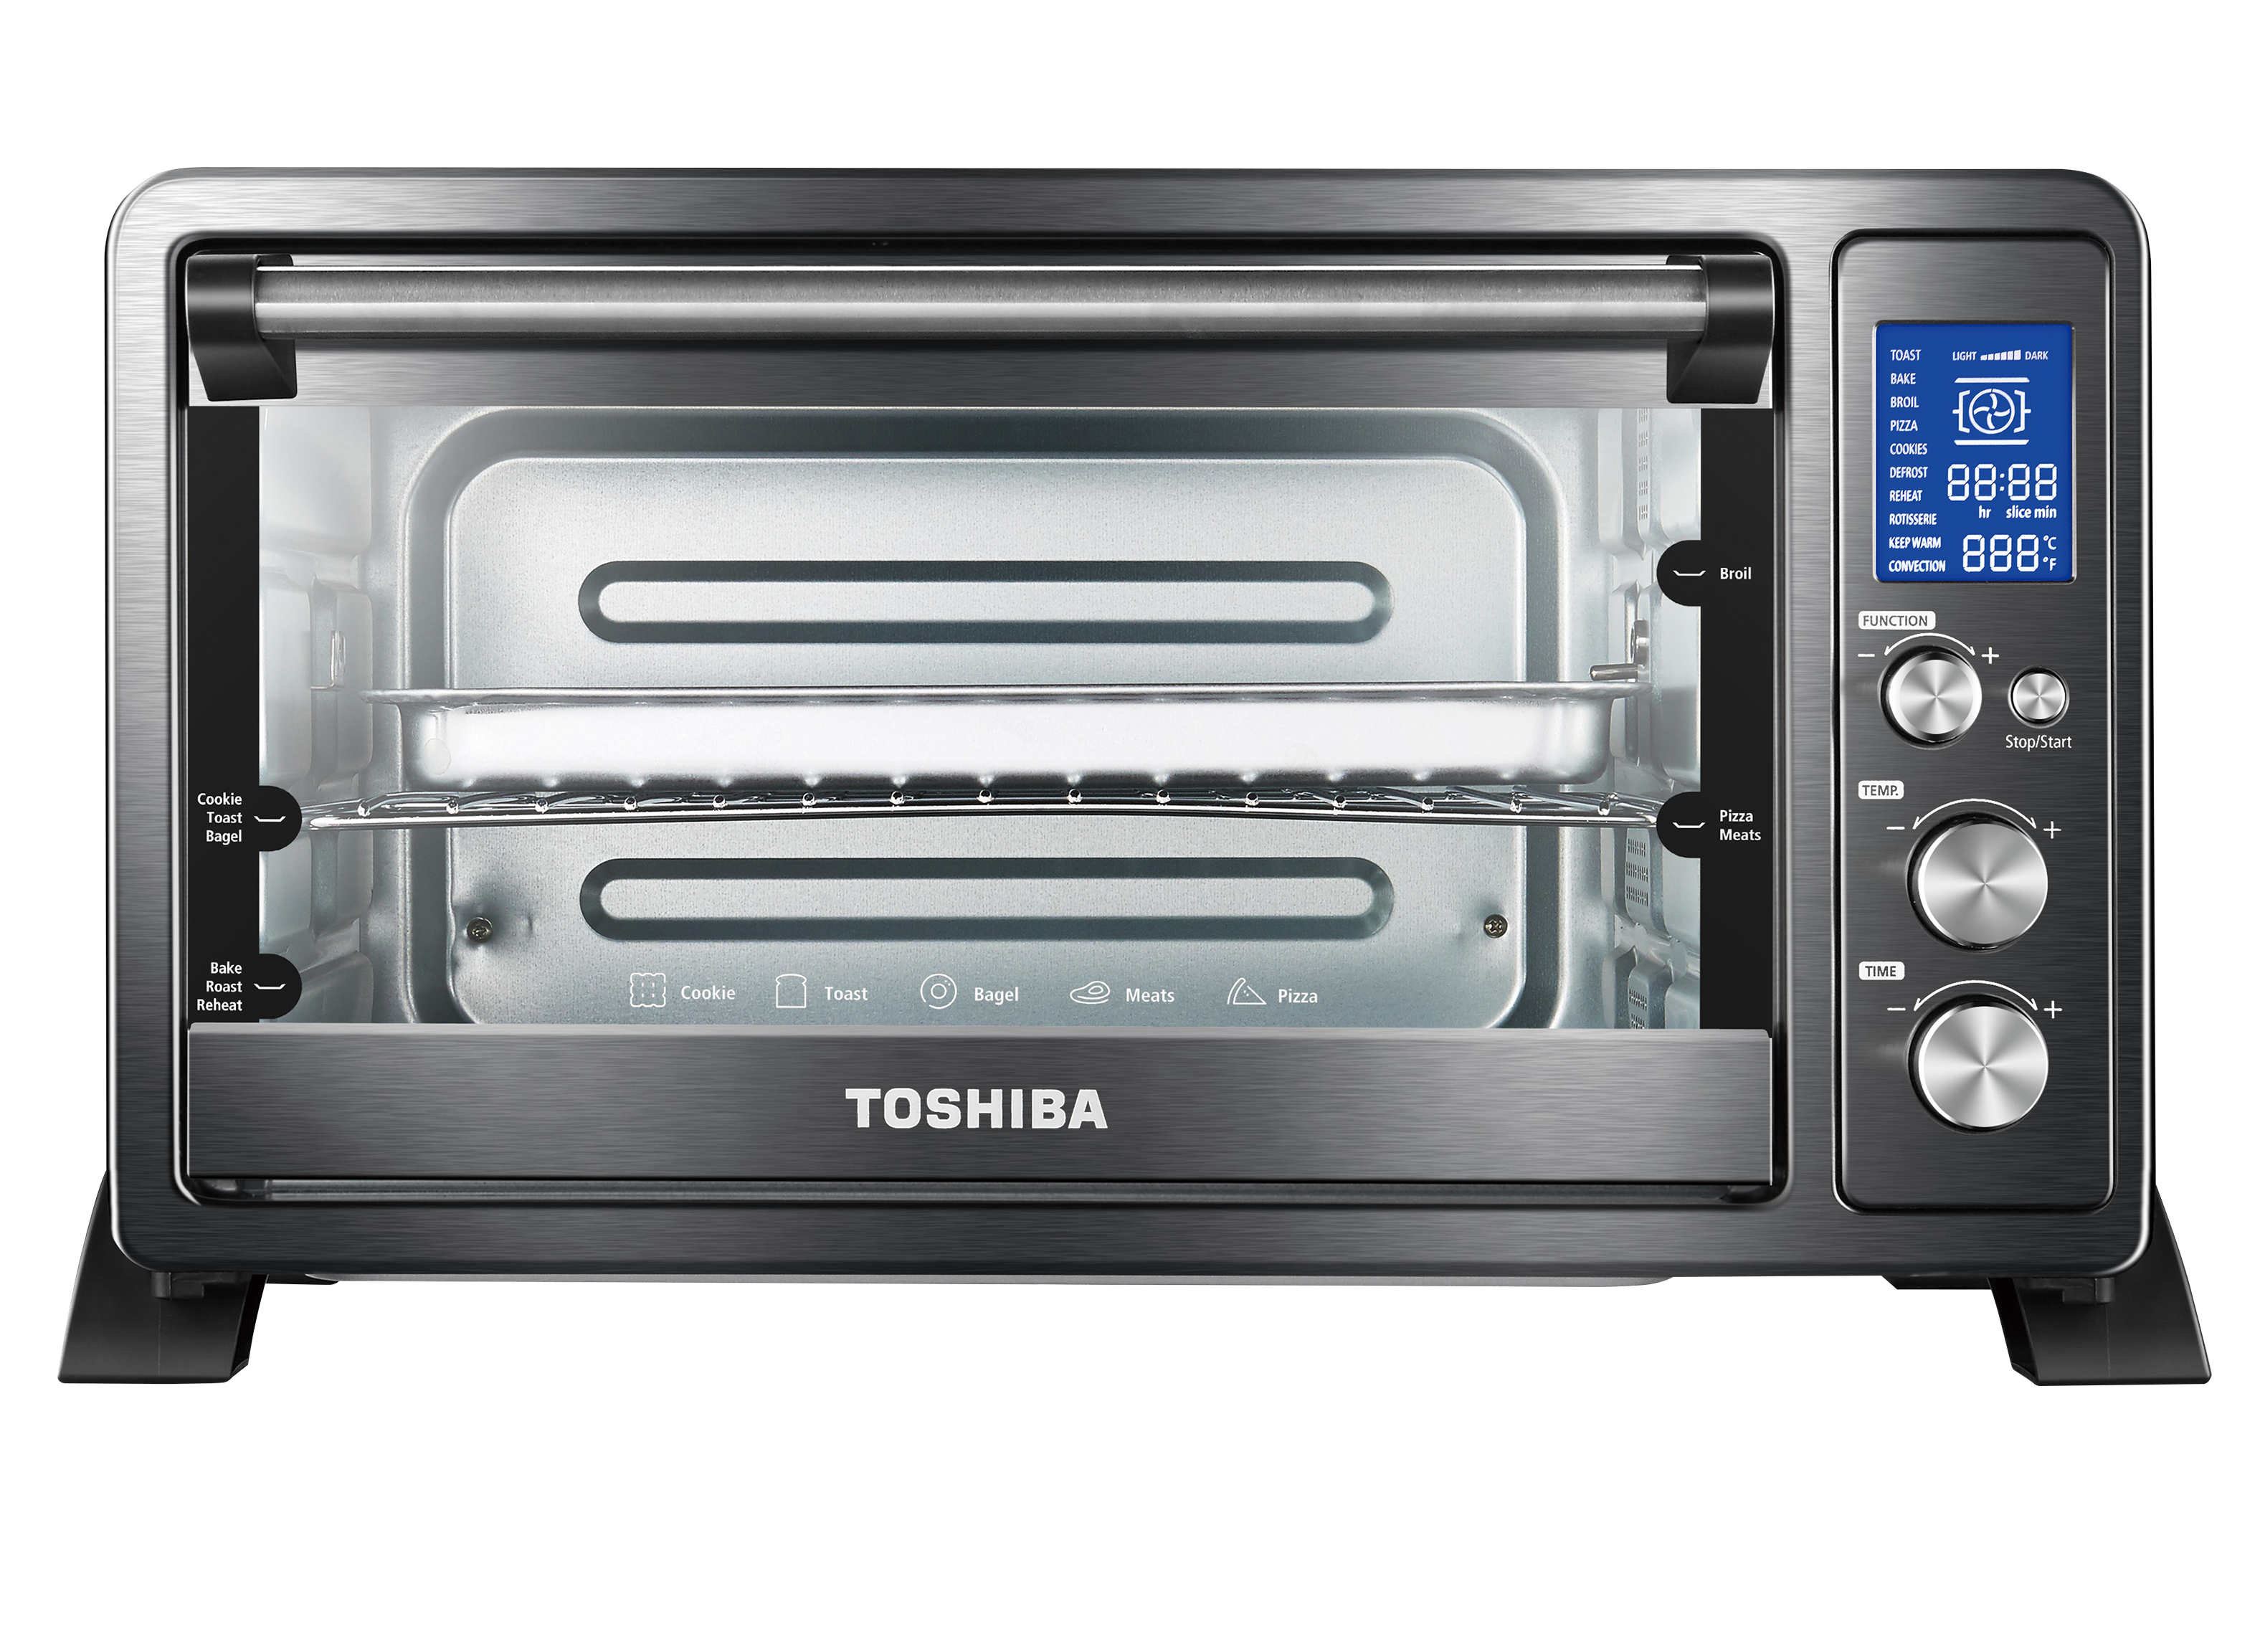 https://crdms.images.consumerreports.org/prod/products/cr/models/397410-toaster-ovens-toshiba-digital-convection-ac25cew-chbs-10002460.png